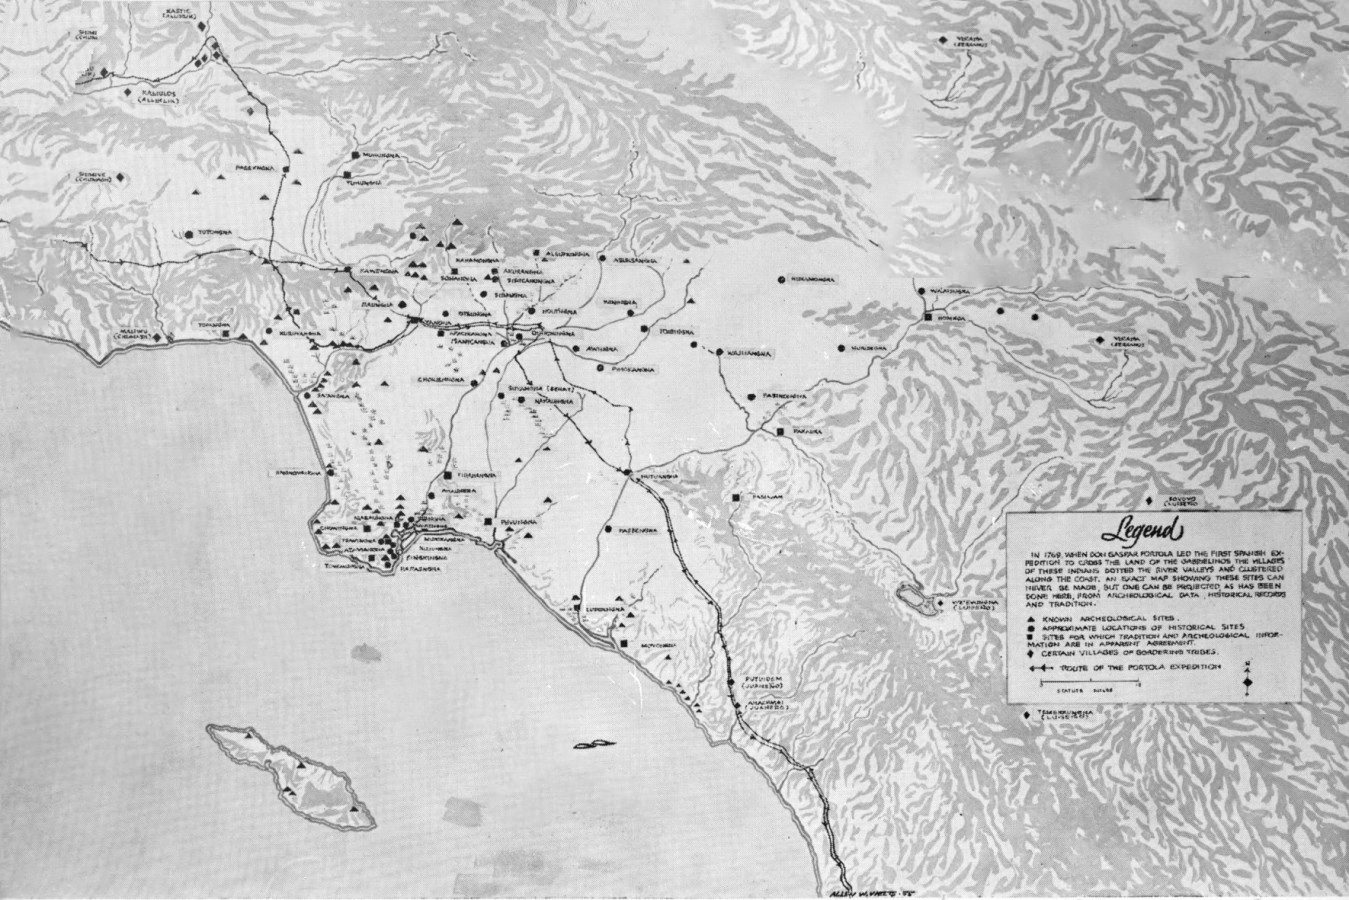 Source: Los Angeles Public Library Map Collection